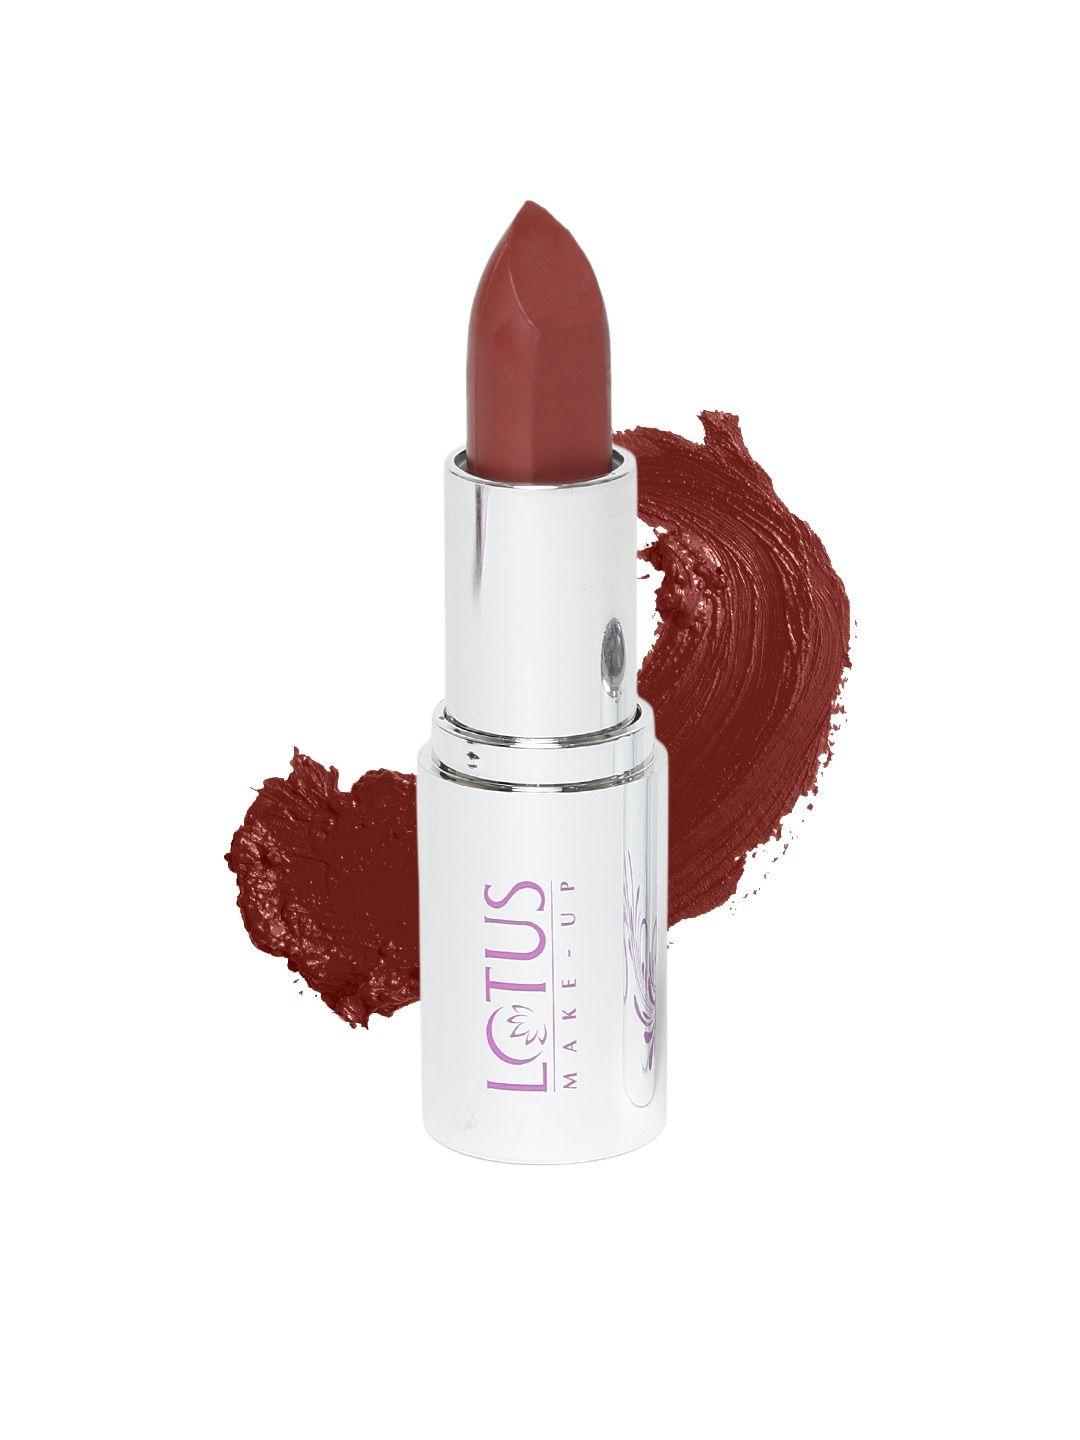 lotus herbals sustainable ecostay butter matte lip color - brown bella bm02